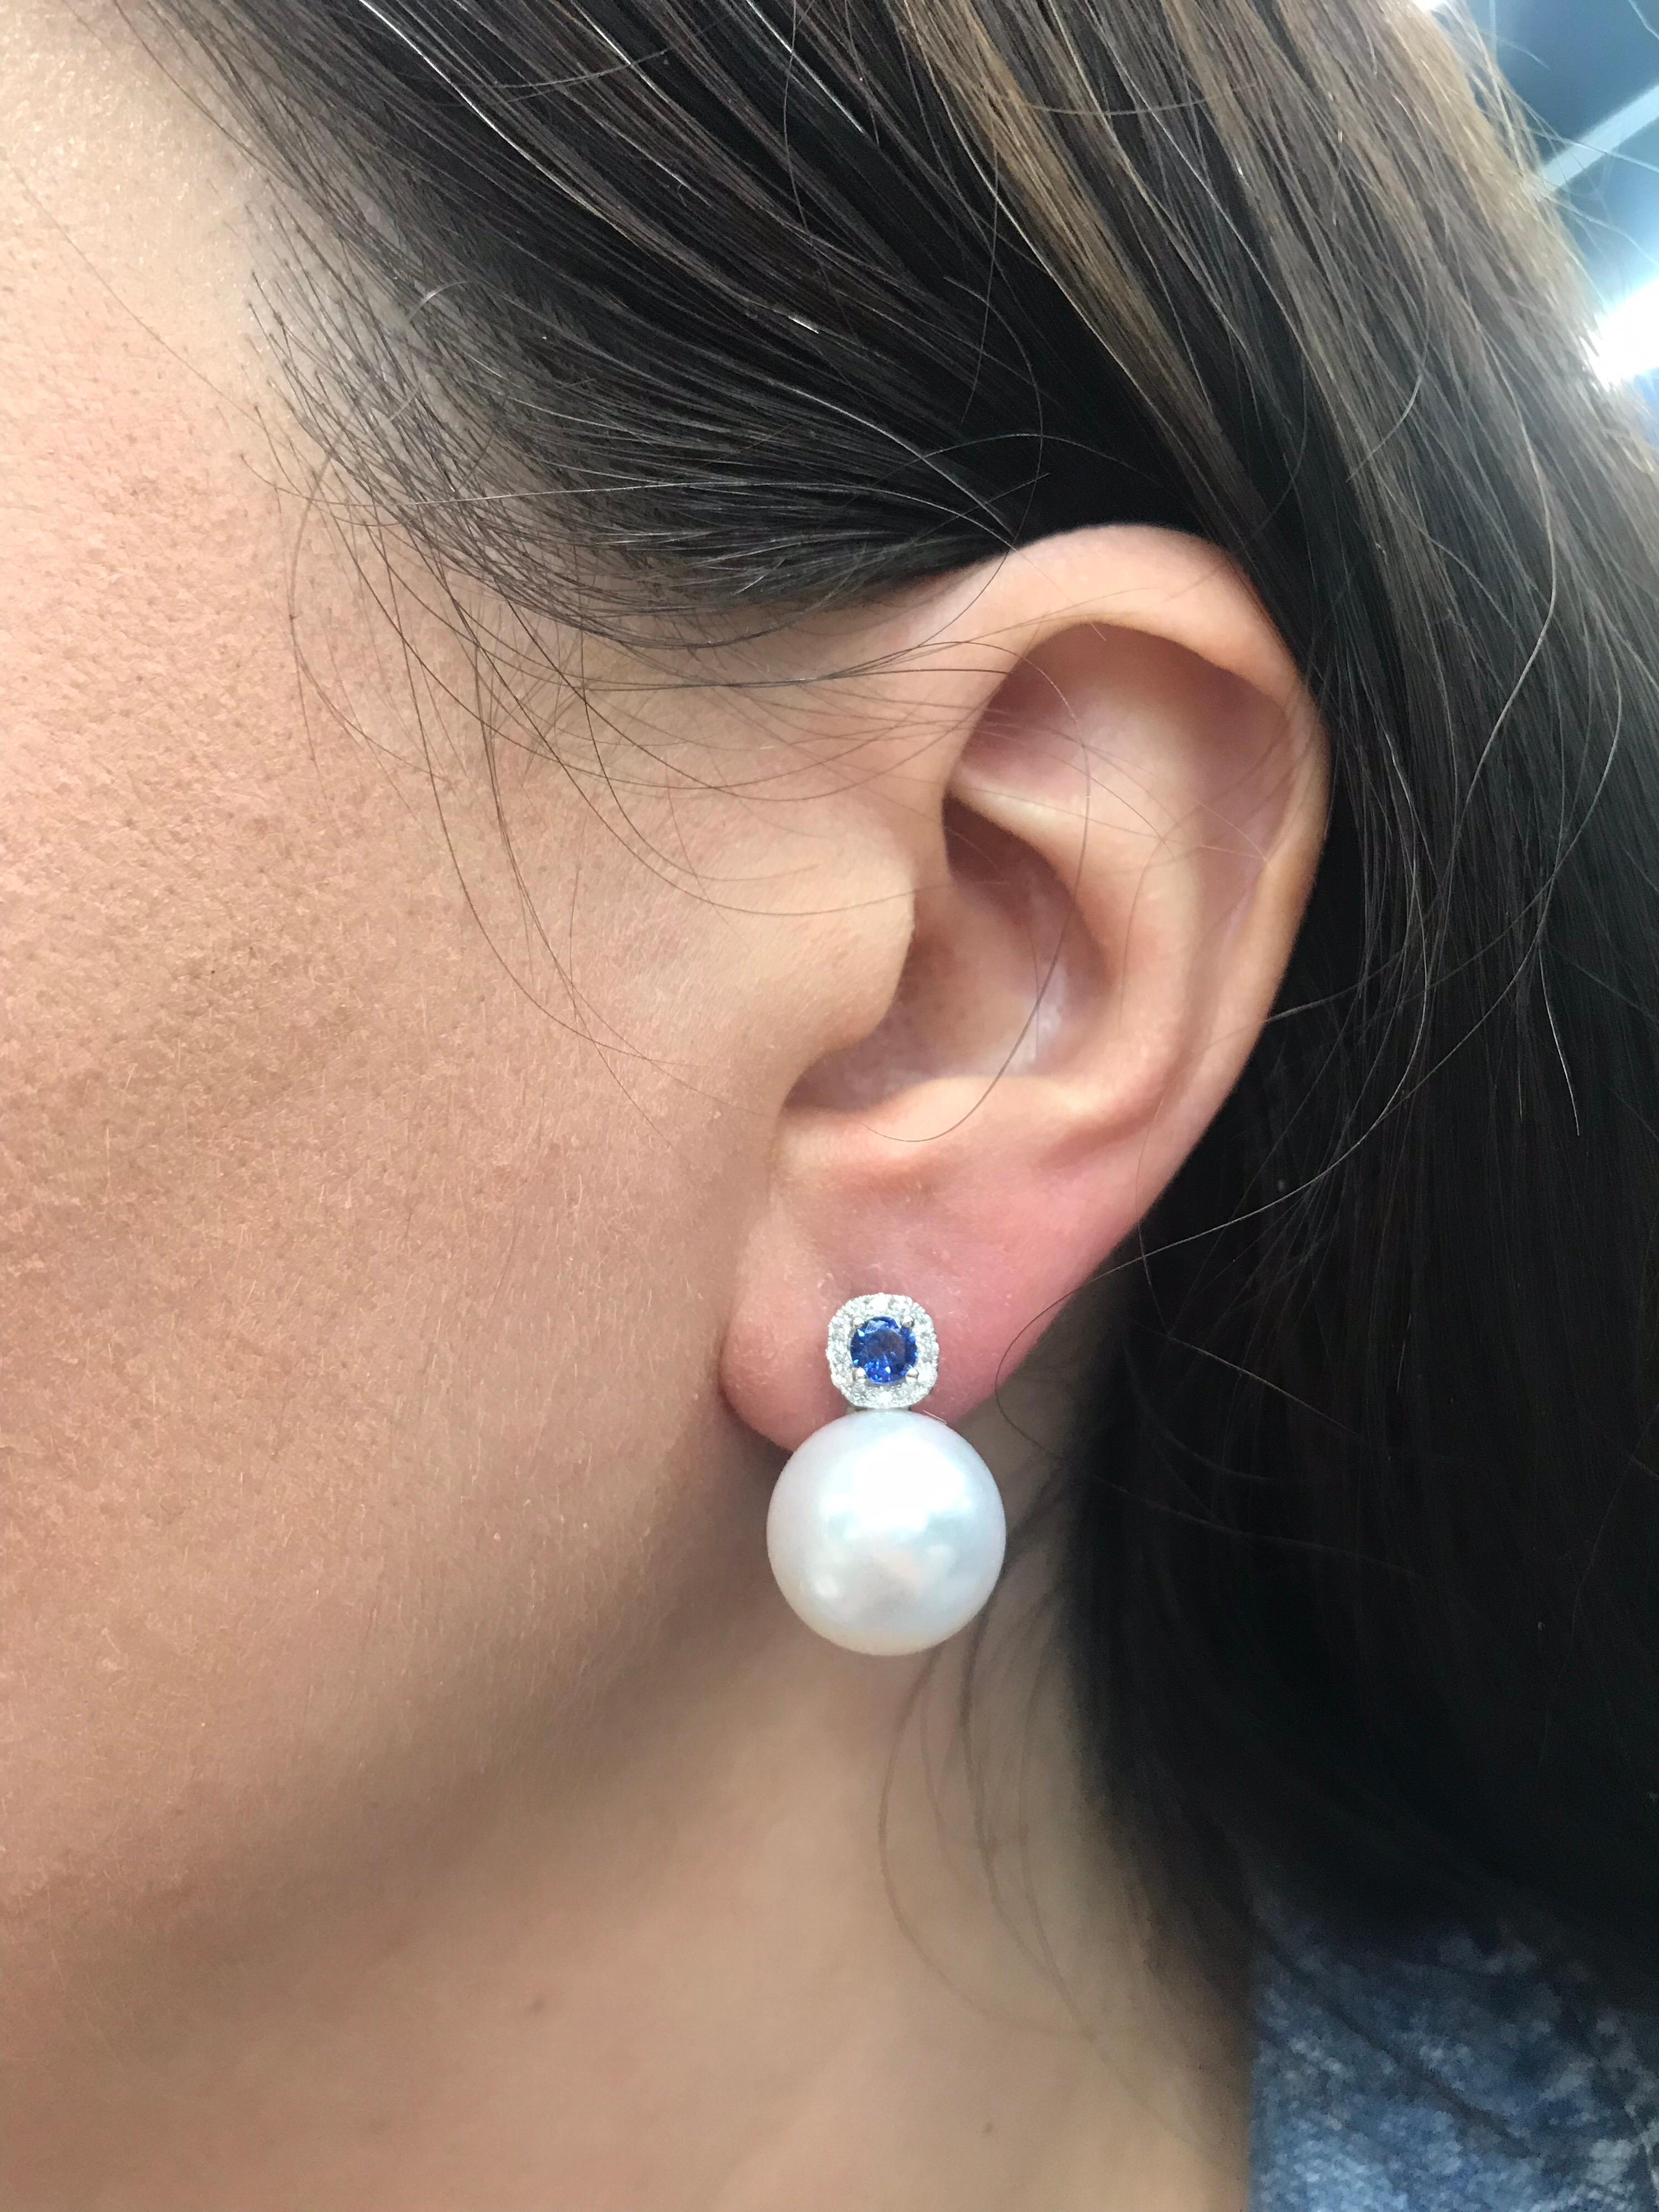 18K White gold drop earrings featuring two sapphires weighing 0.60 carats flanked with round brilliants, 0.24 carats, and two South Sea Pearls measuring 14-15mm. 